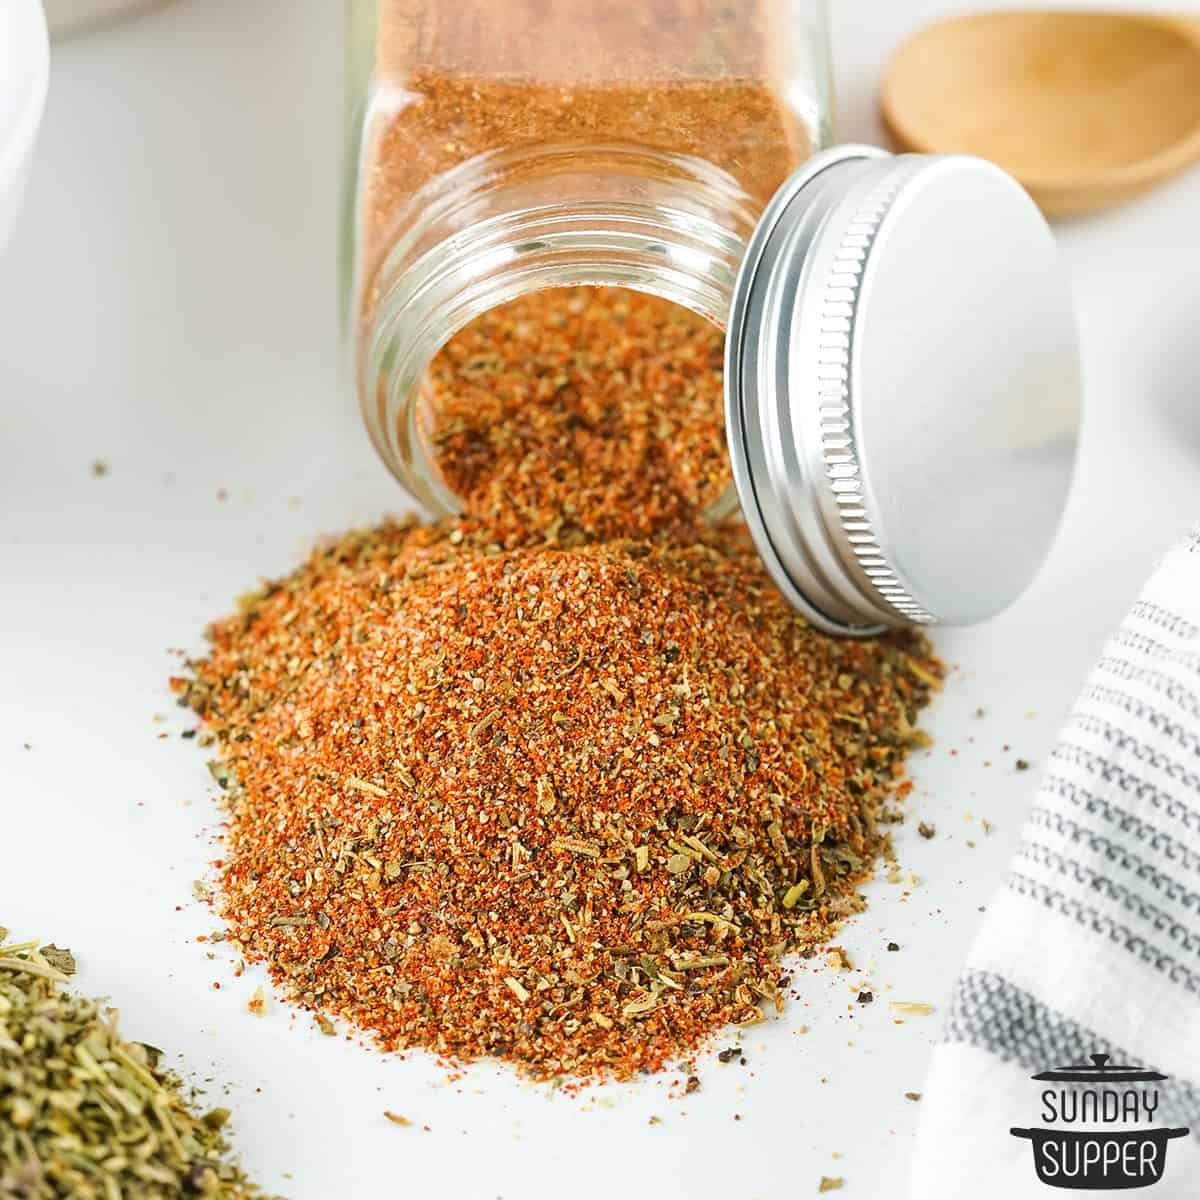 cajun spice spilling out of an open spice jar